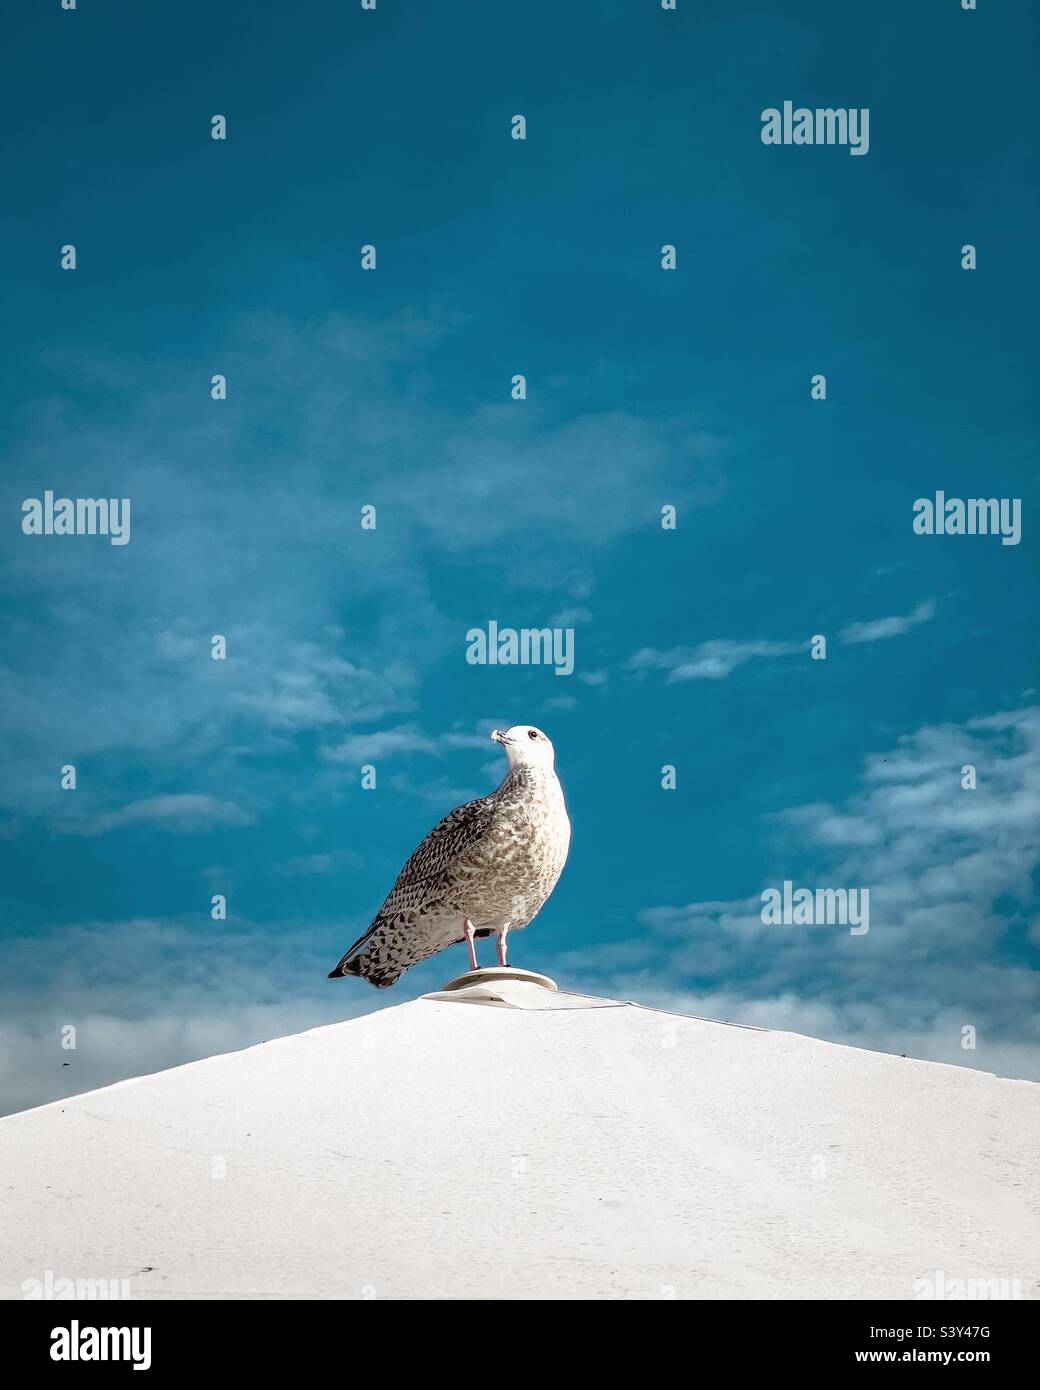 Seagull sitting on a white surface with a blue sky behind Stock Photo